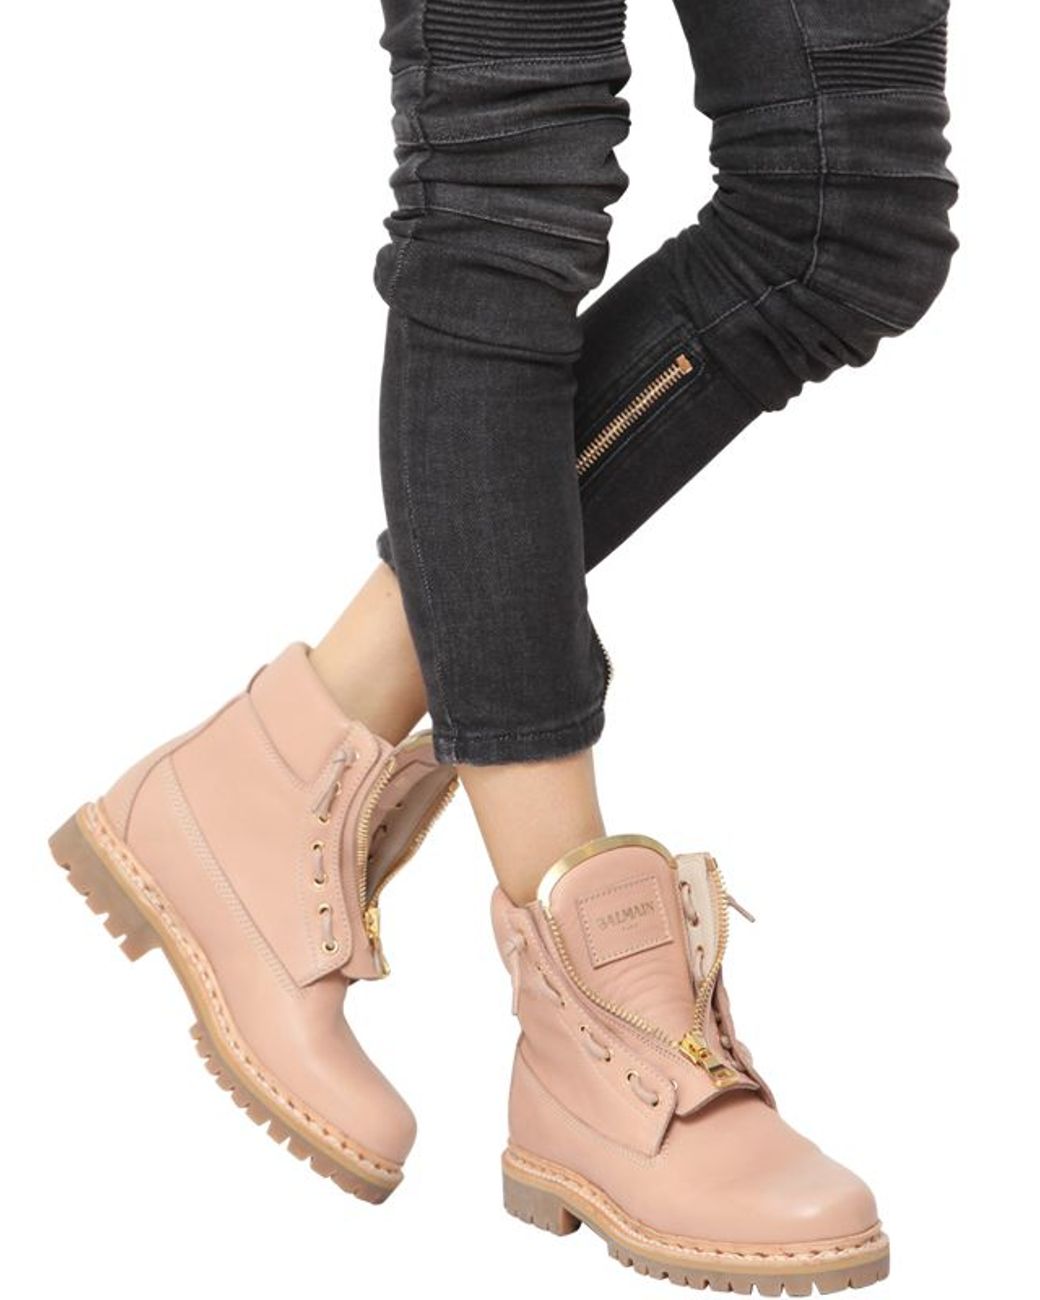 Balmain Taiga Leather Military Boots in Pink | Lyst